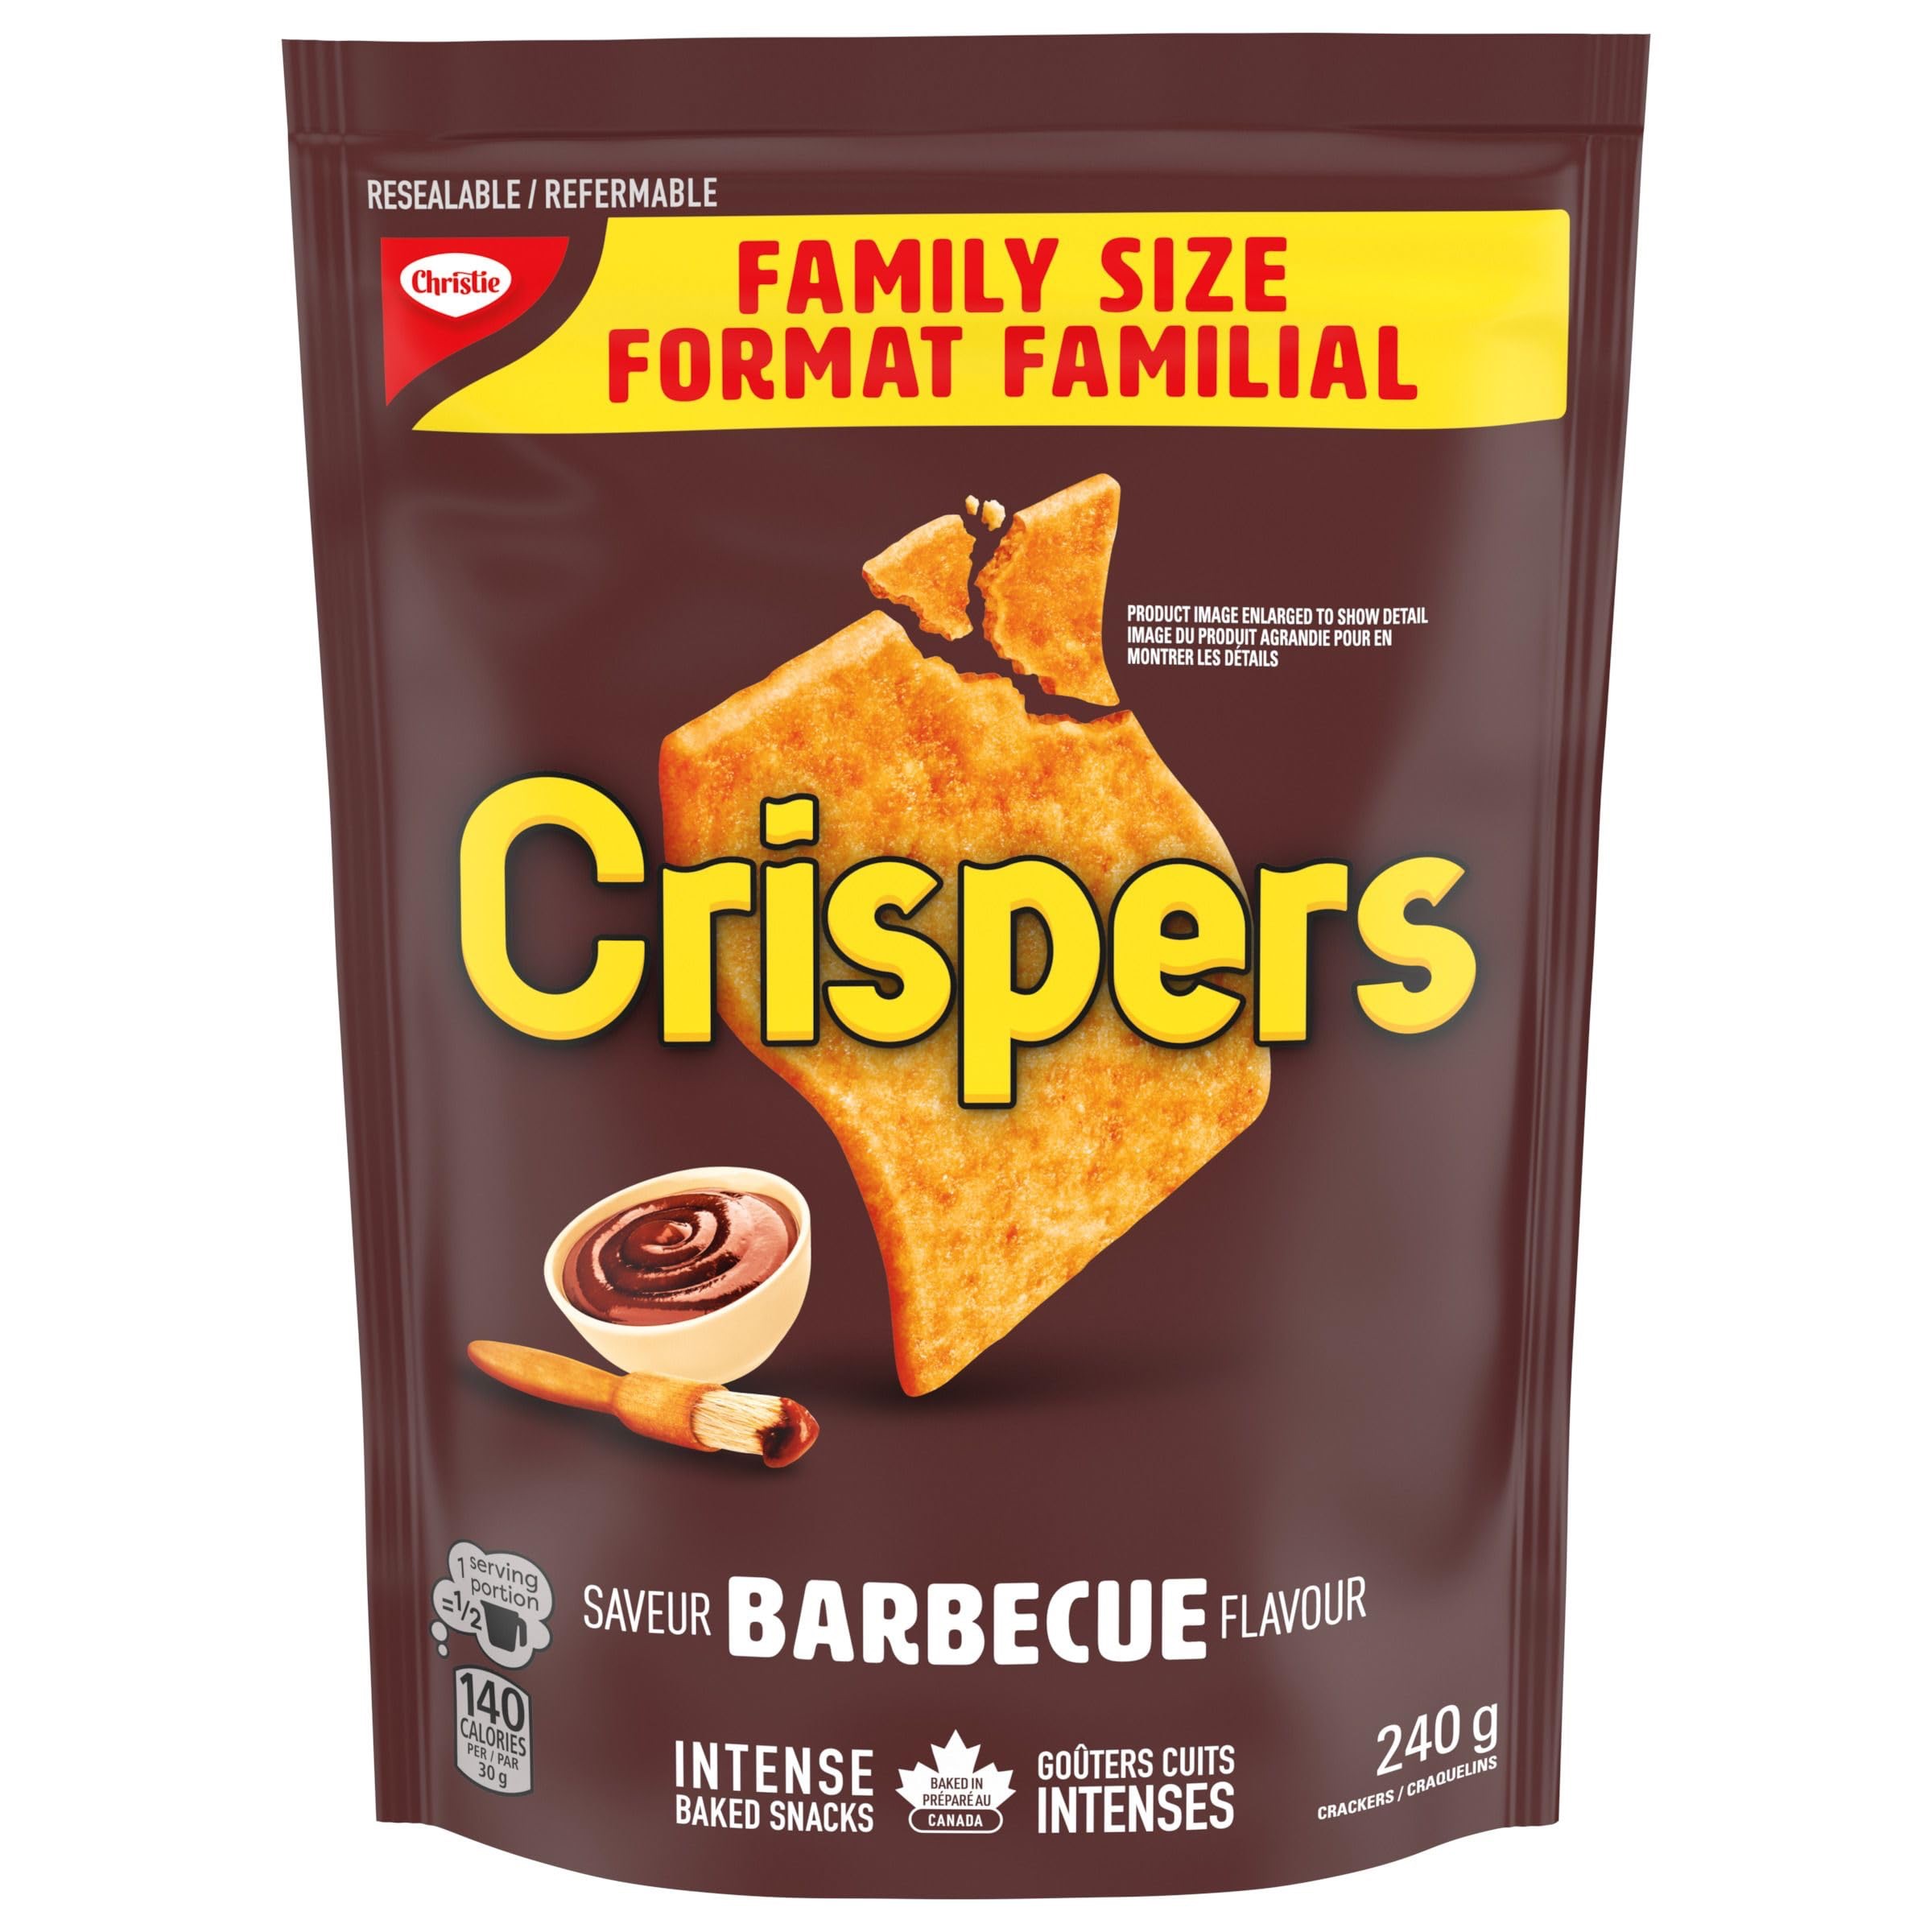 Crispers, Barbecue Crackers, BBQ, Family Size, Salty Snacks, Is It a Chip or a Cracker, 240g : Amazon.ca: Grocery & Gourmet Food